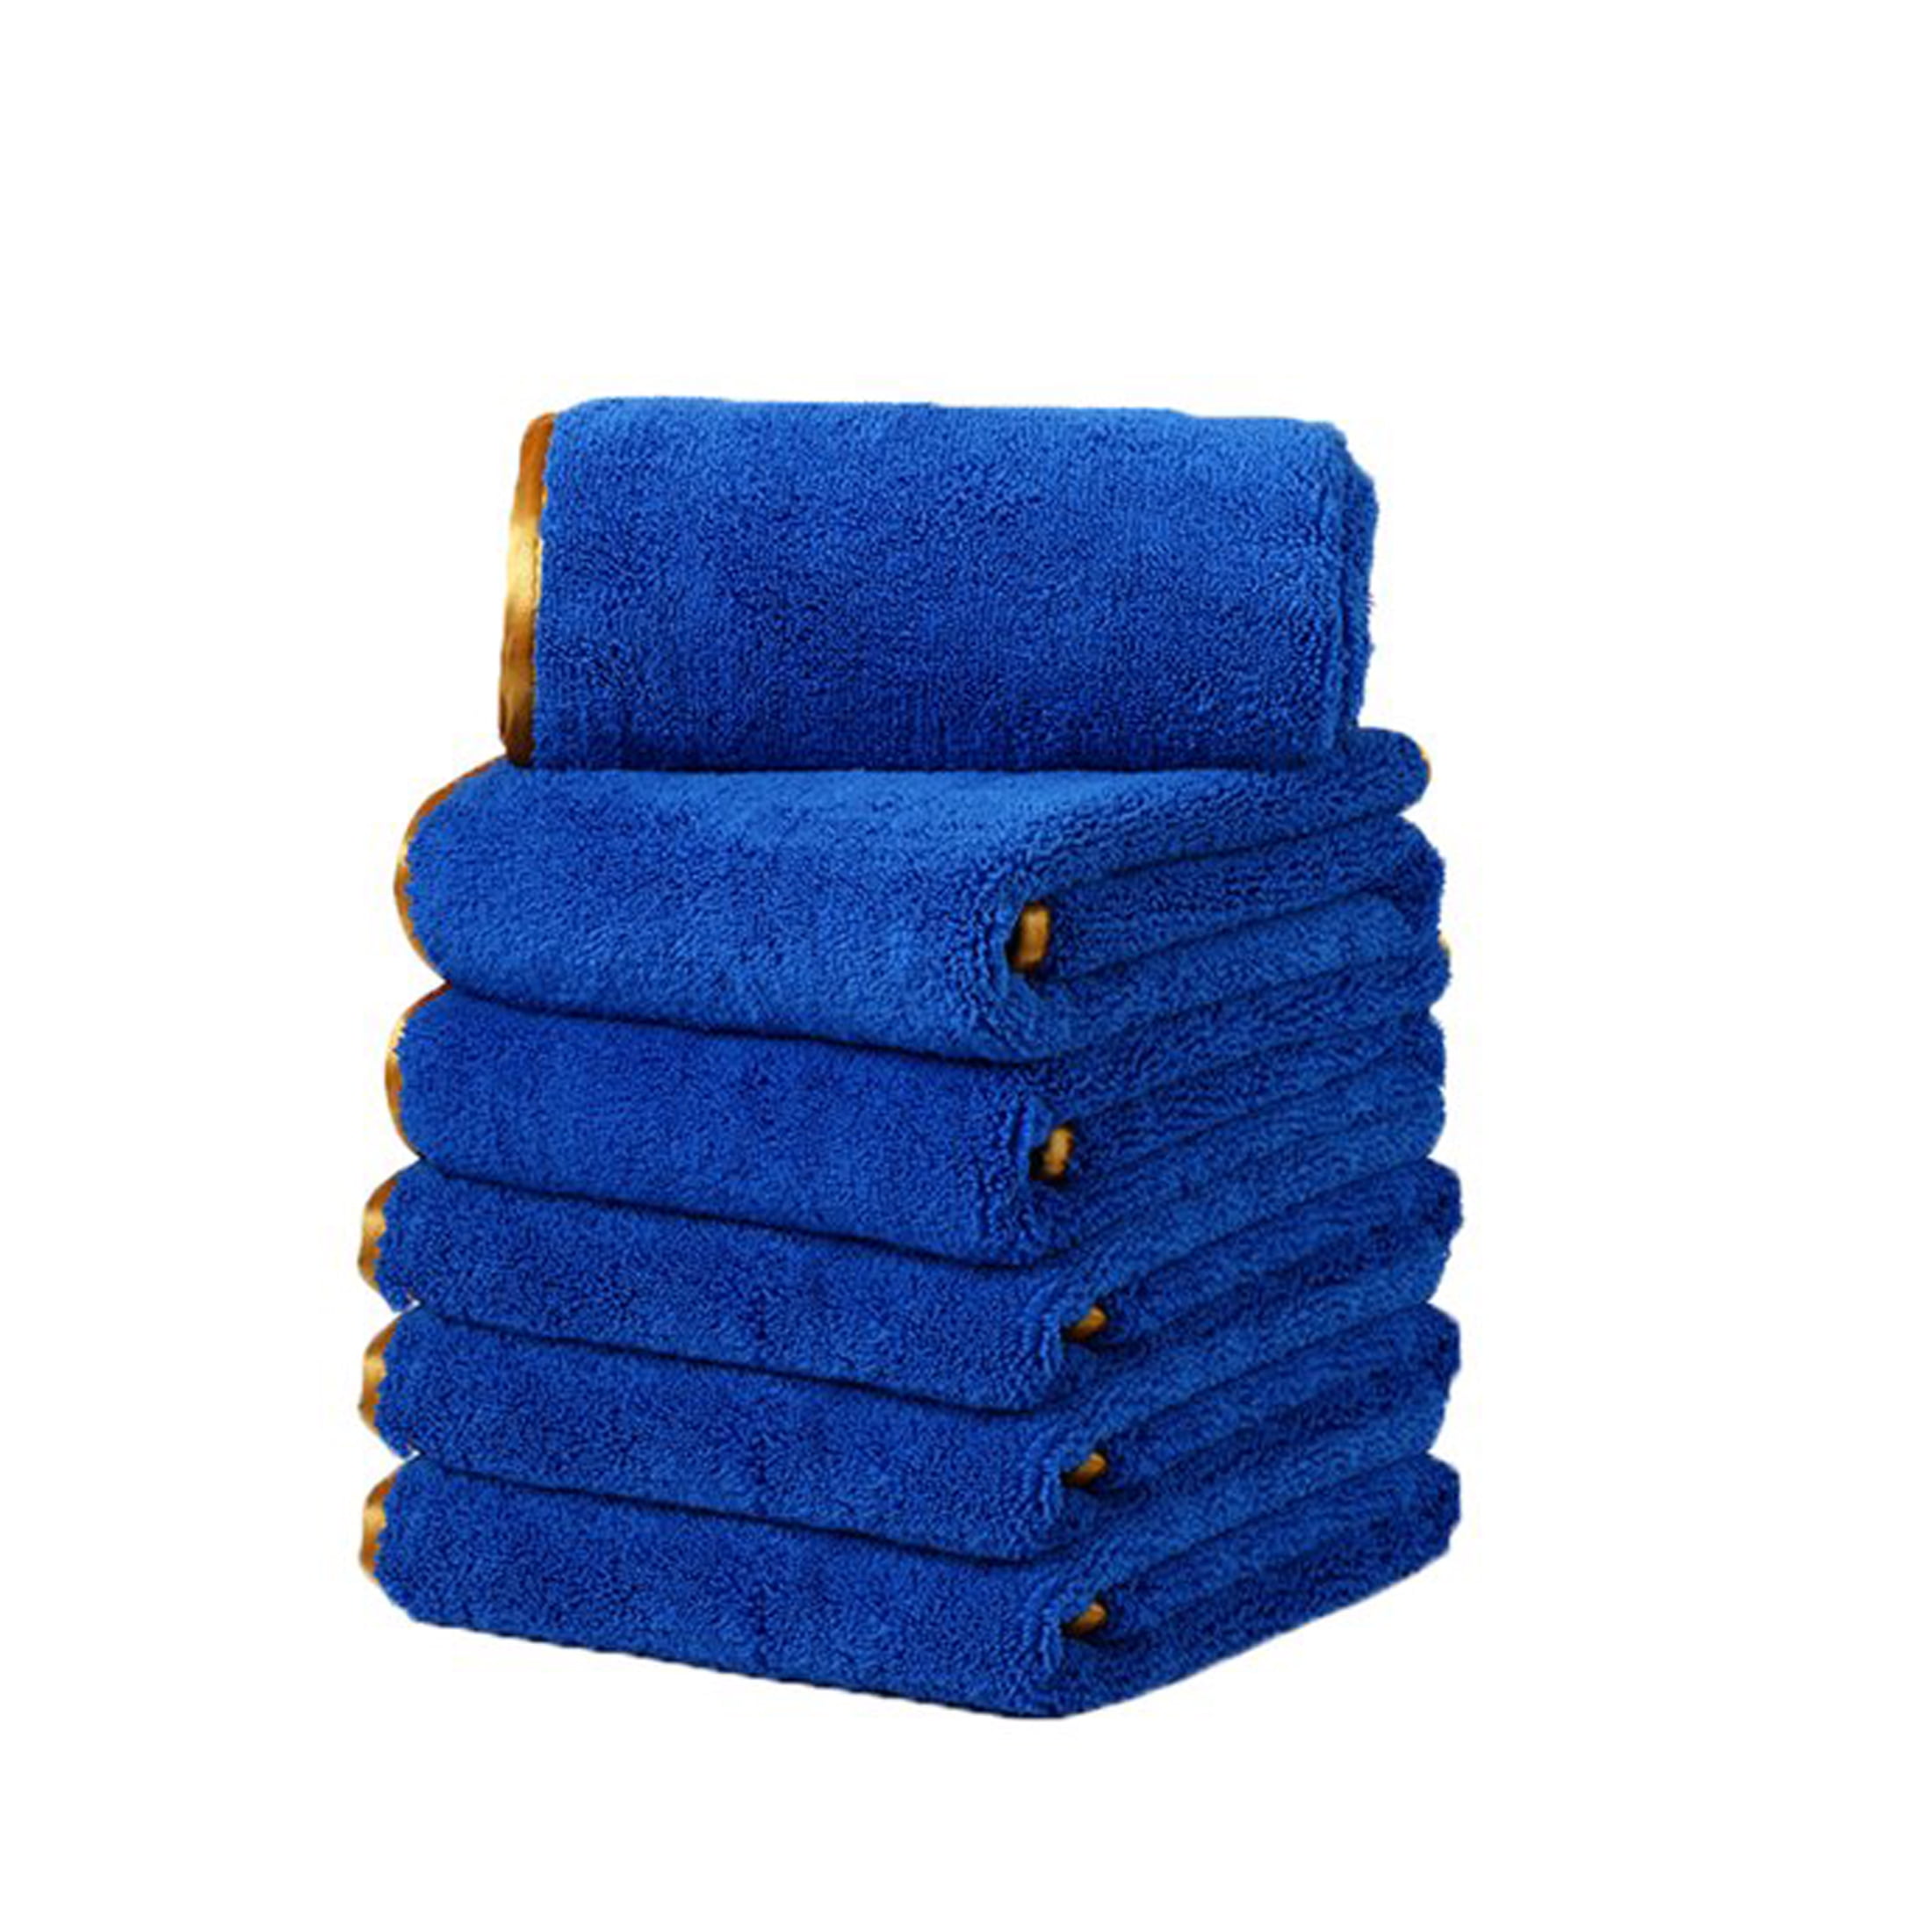 6 Blue Microfiber Towel Cleaning Cloth for LED TV and Auto Detailing Polishing 